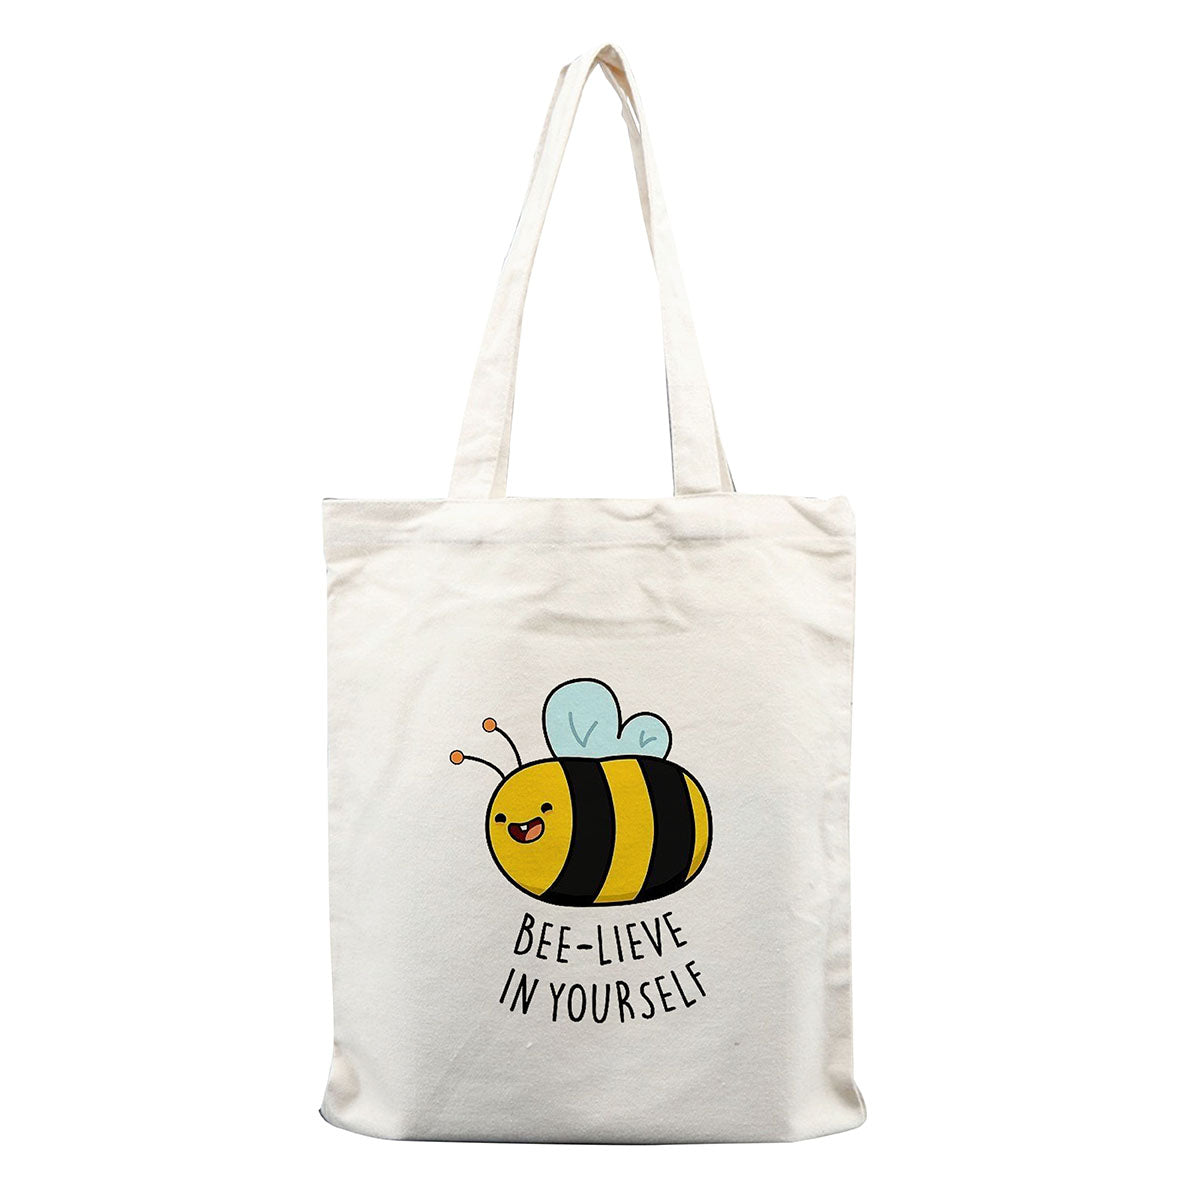 Chillaao- Bee Lieve In Yourself Tote Bag